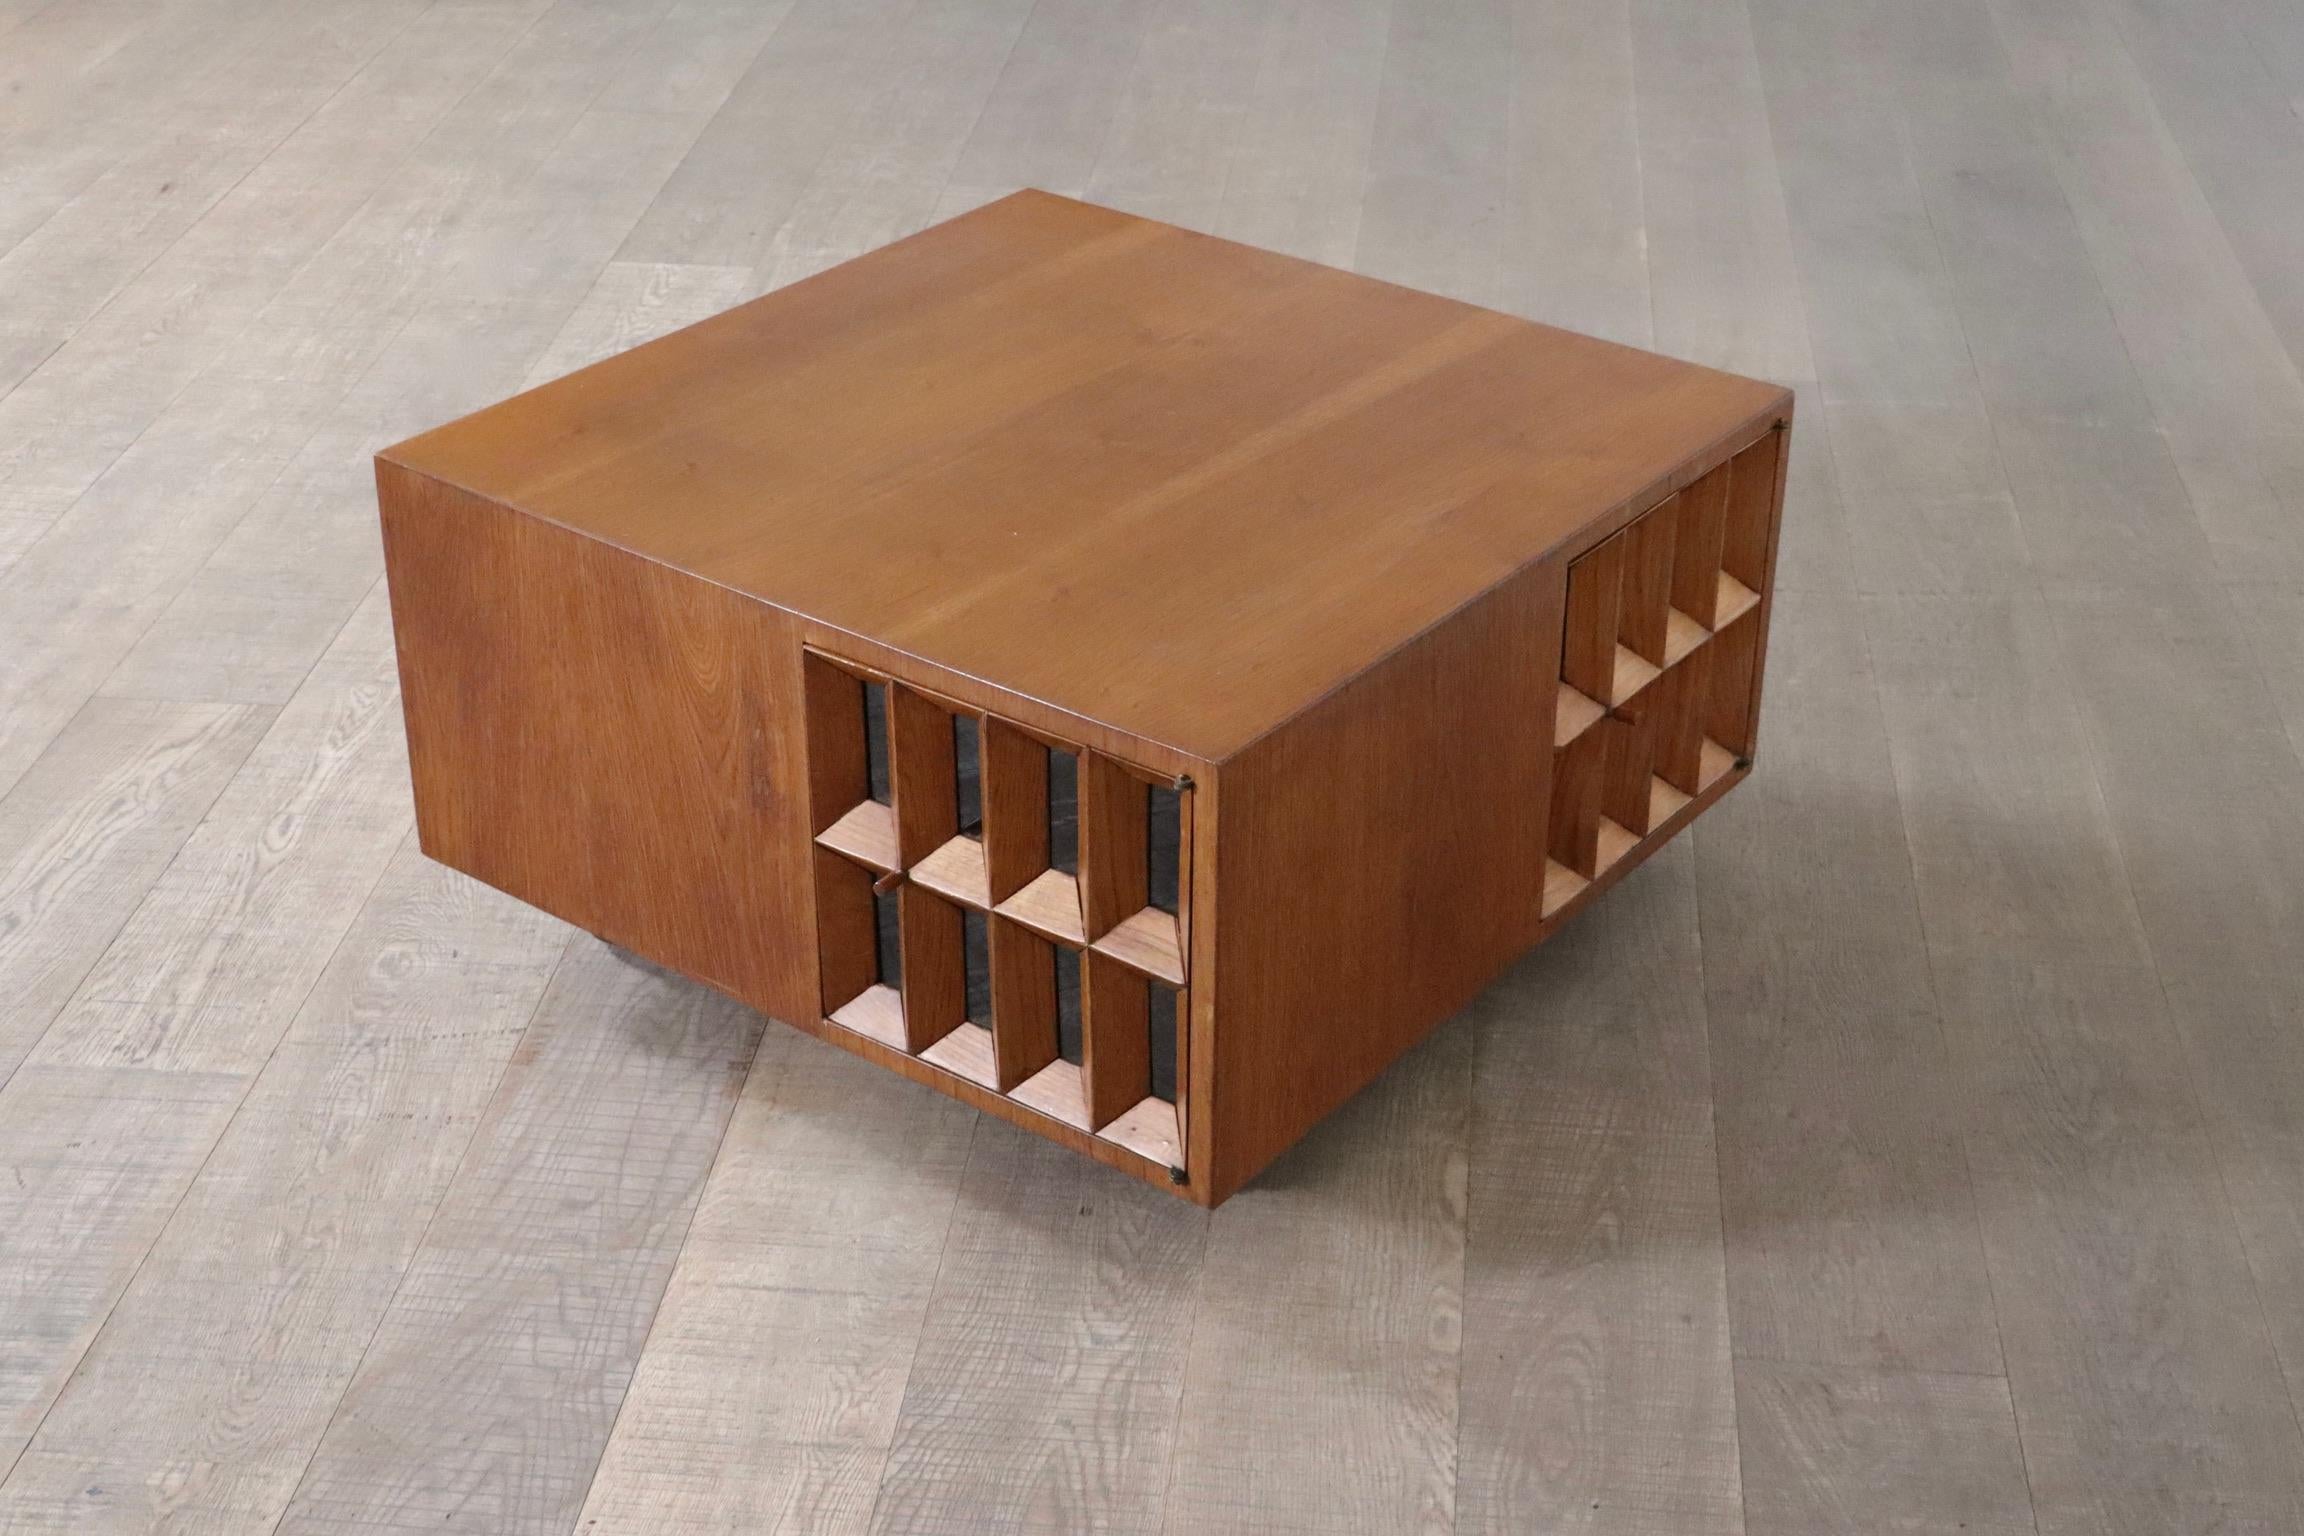 Late 20th Century Giuseppe Rivadossi Coffee Table In Oak With Glass Framed Doors, Italy 1975